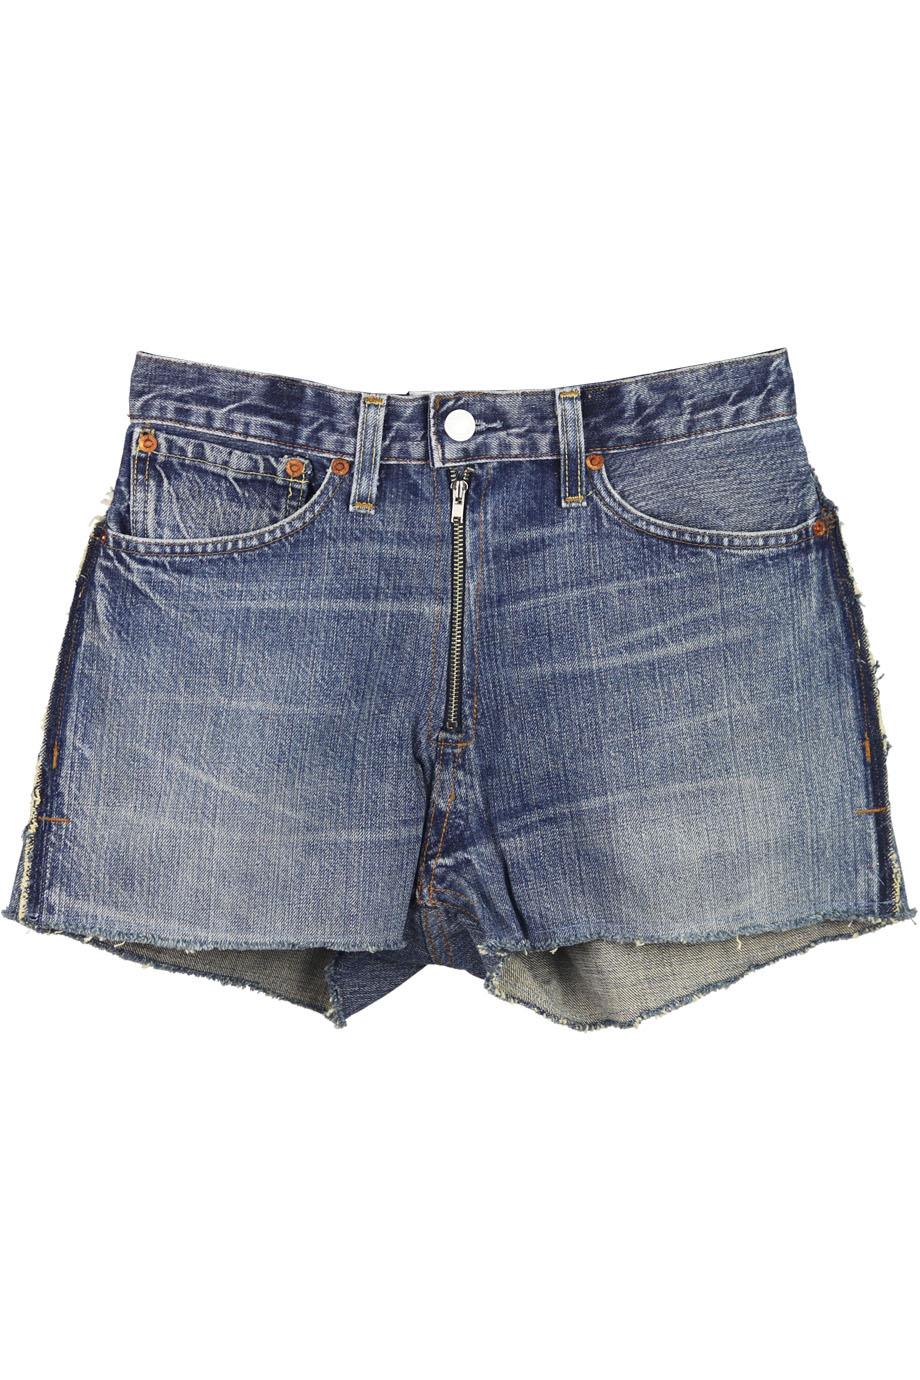 RE/DONE DISTRESSED HIGH WAISTED DENIM SHORTS W24 UK 6